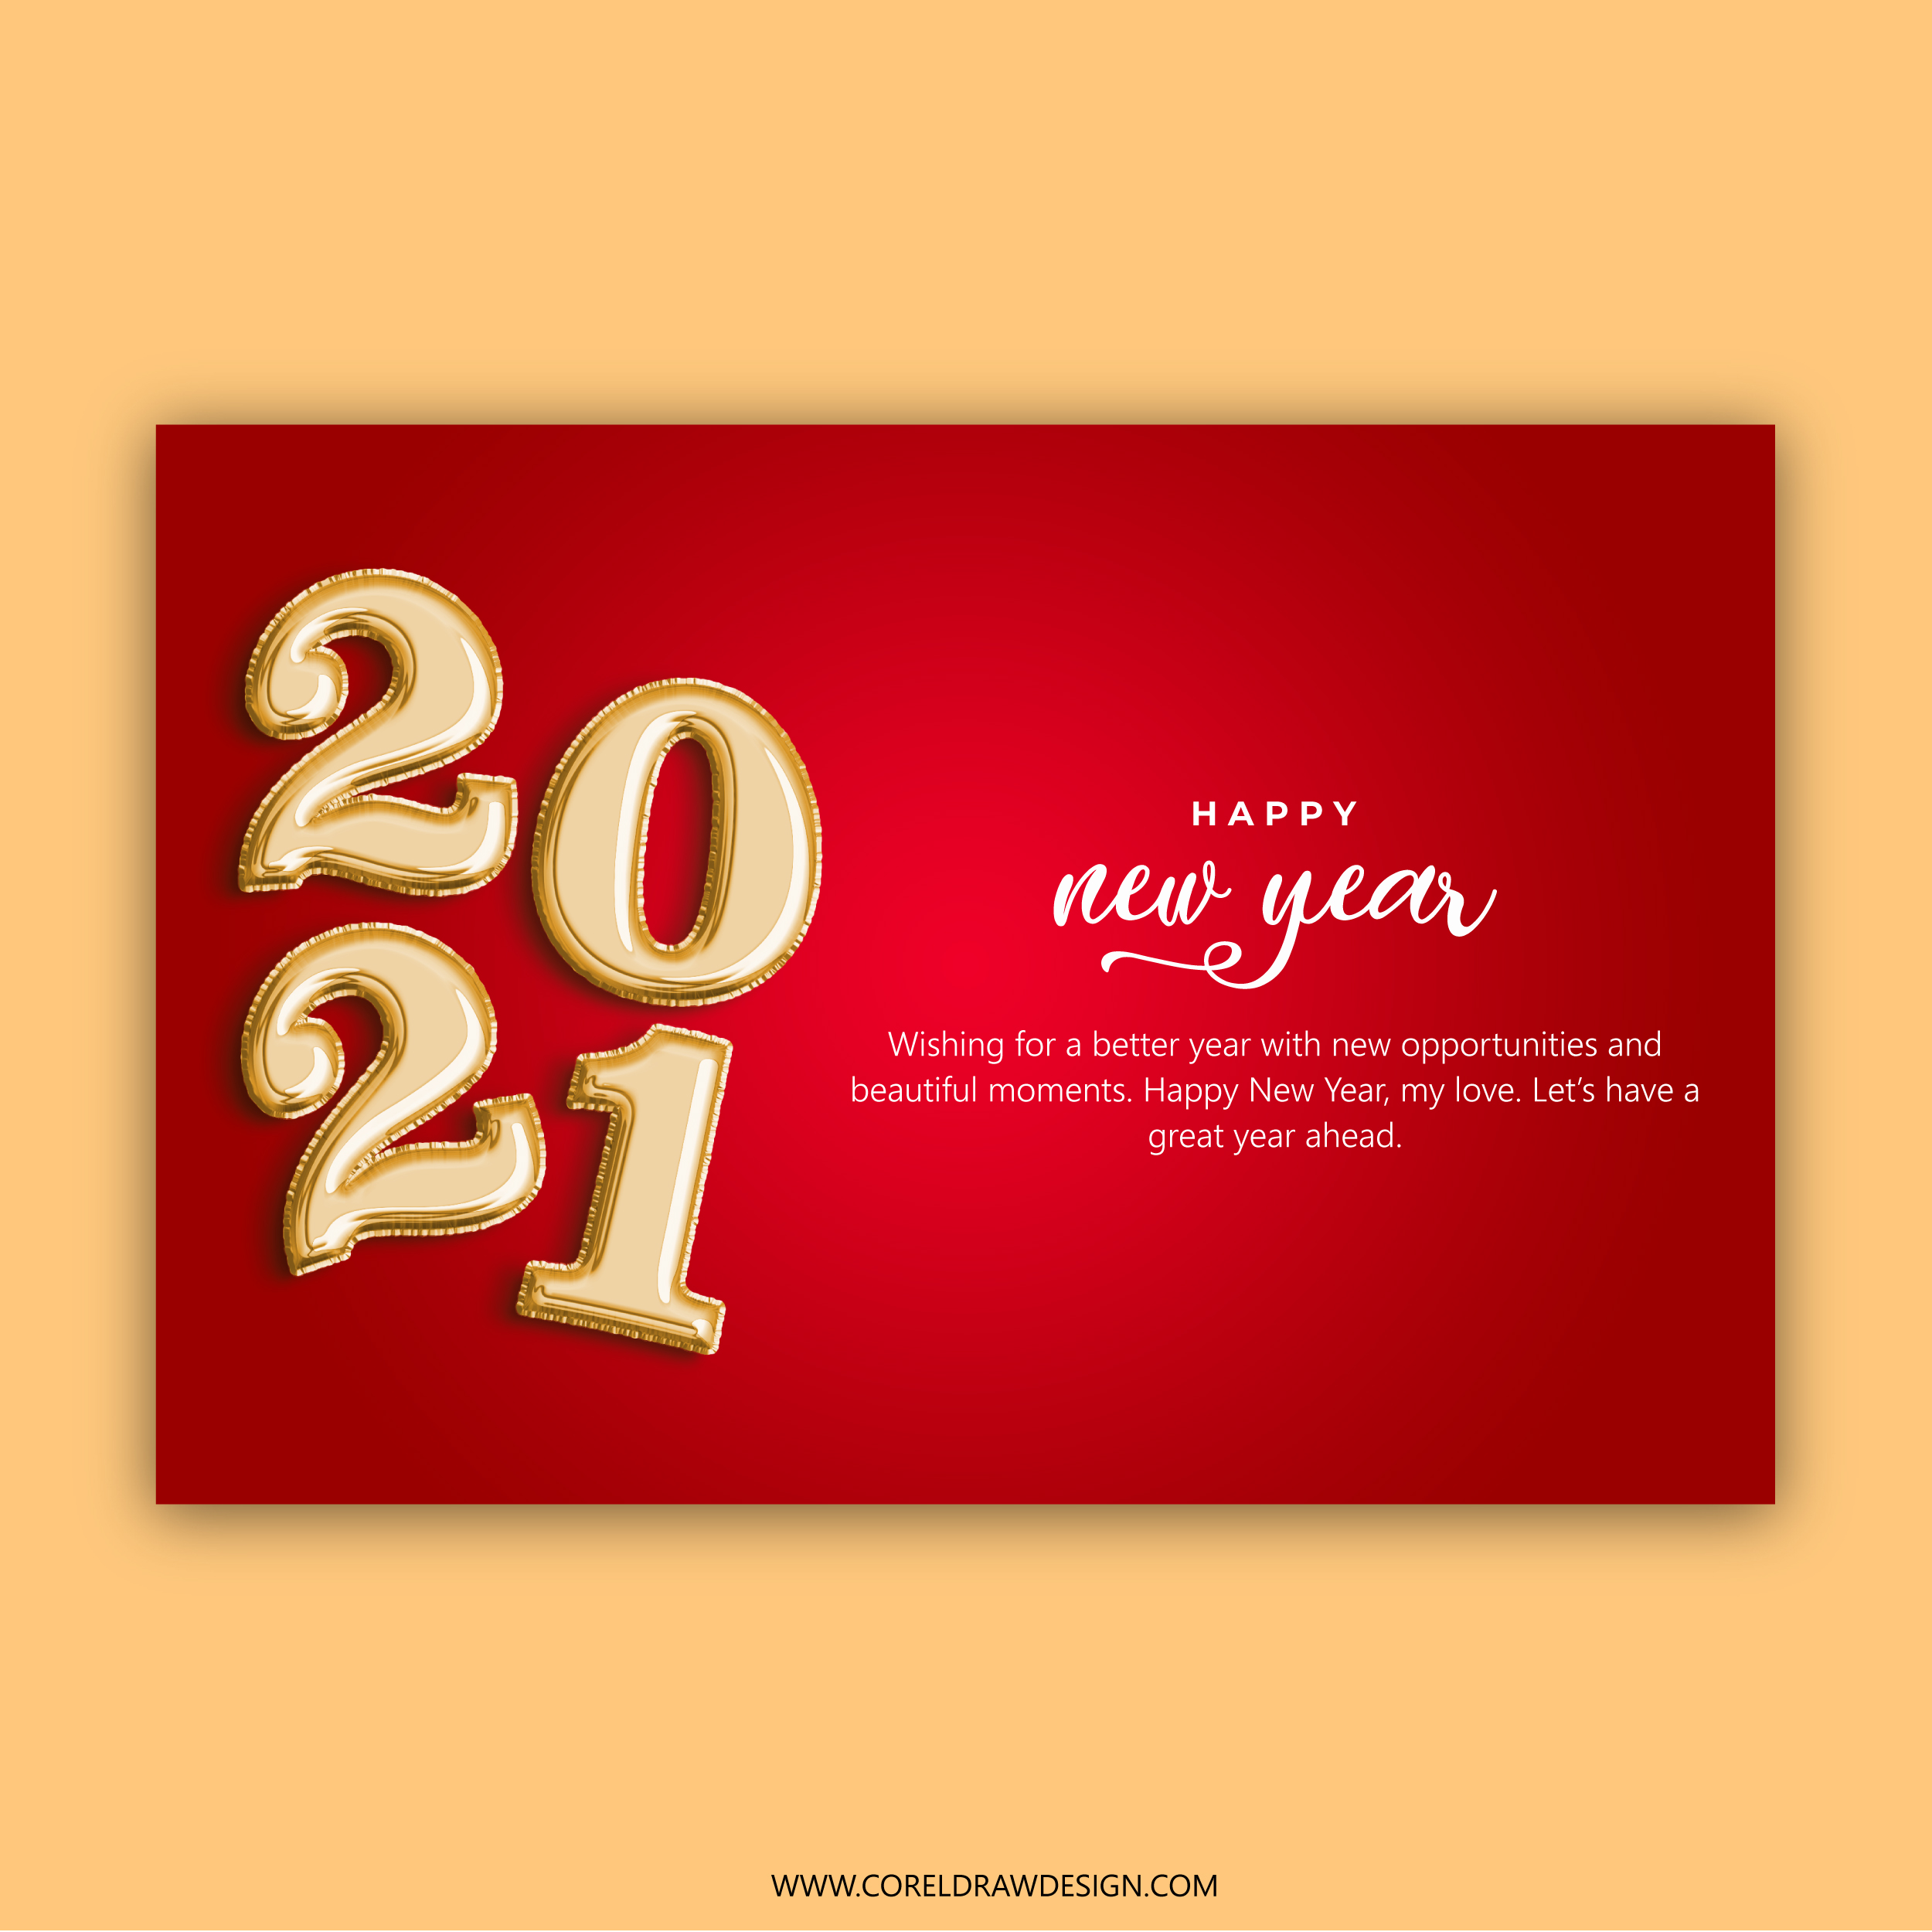 2021 NEW YEAR WISHES LETTERING BANNER OR CARD